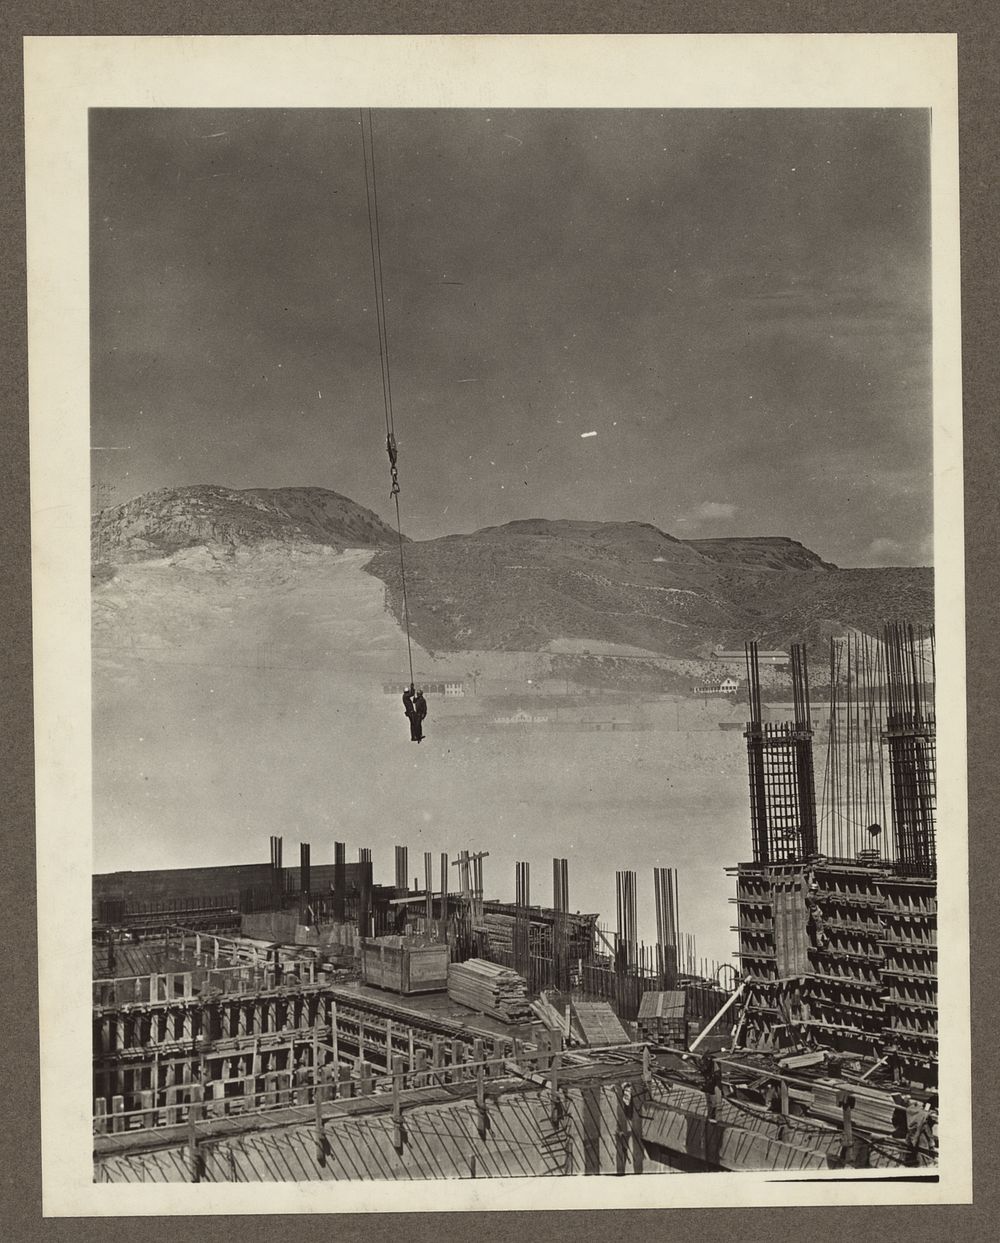 Grand Coulee Dam, Columbia Basin Reclamation Project, Wash. Two riggers on a hook on their way to work at the powerhouse on…